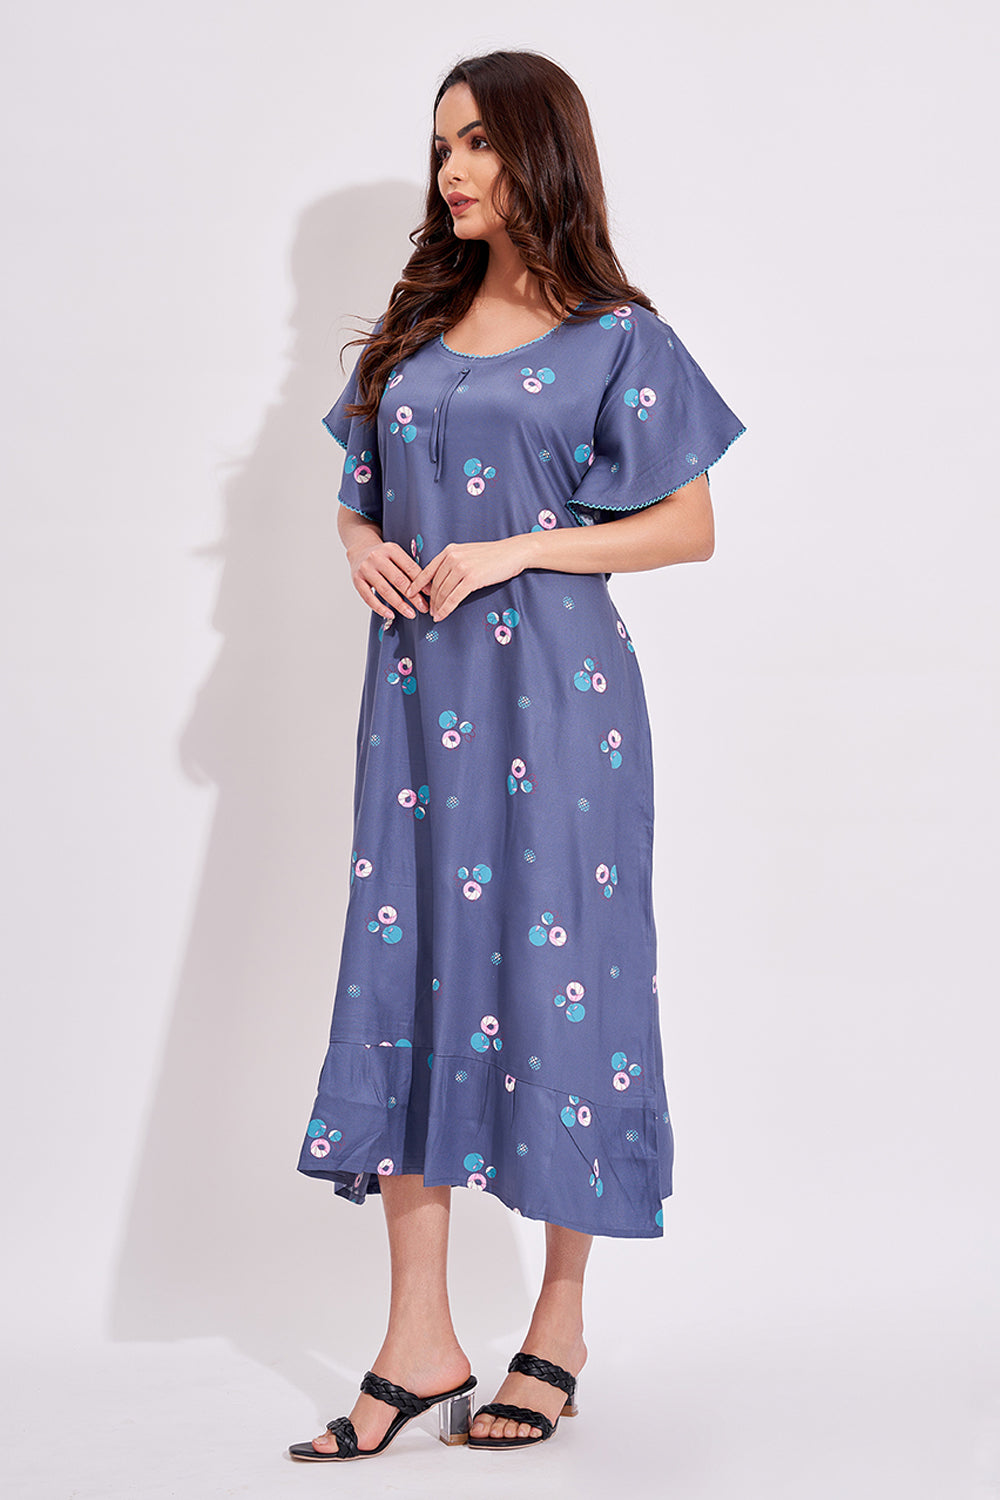 Skkinvalue's Special Free style rayon printed nighty nightgowns for wo –  skkinvalue